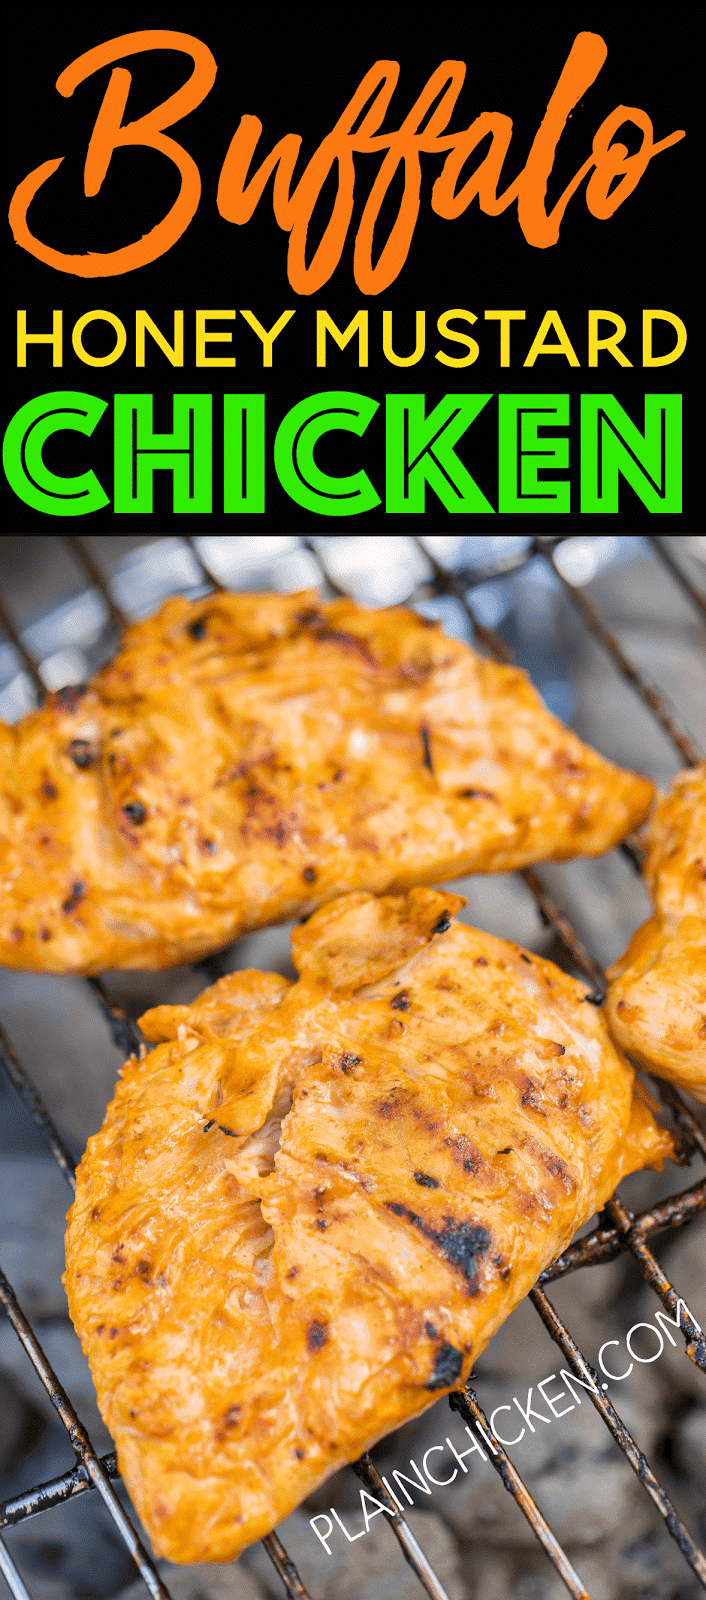 Buffalo Honey Mustard Chicken - only 3 ingredients! It sounds like a weird combination, but it is AMAZING! A real crowd pleaser. This will definitely be on our tailgating menu this Fall!